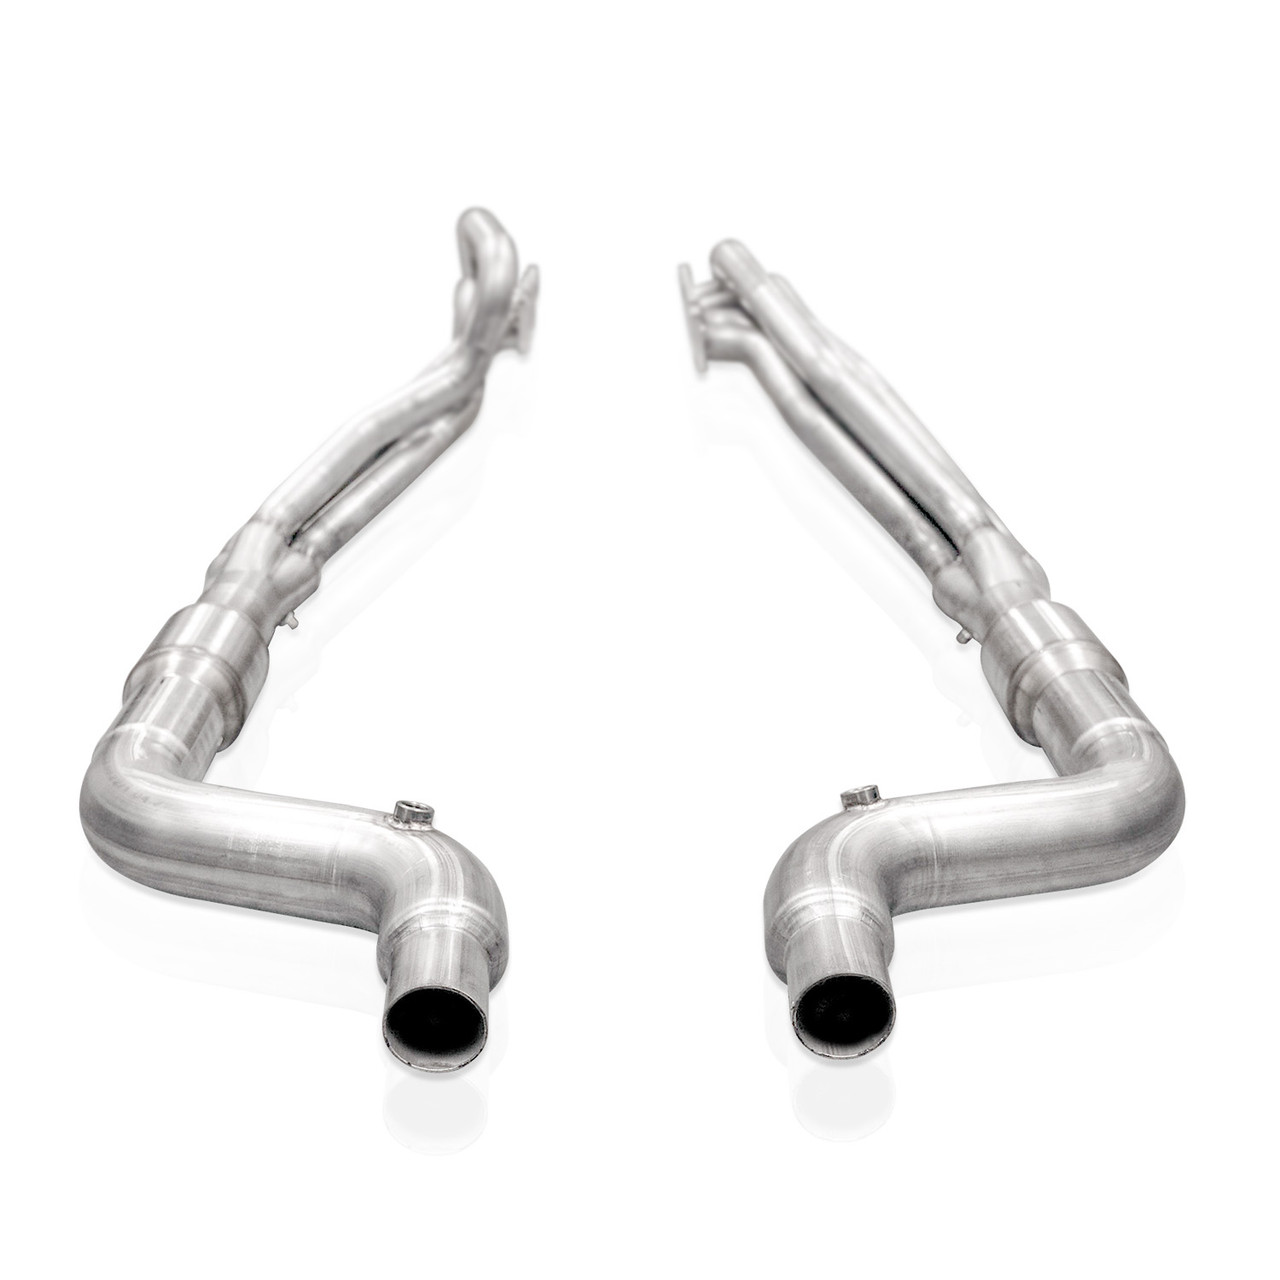 Stainless Works 2" Long Tube Headers w. High Flow Cats / Factory Connect - S550 / S650 Mustang (M242HCAT)